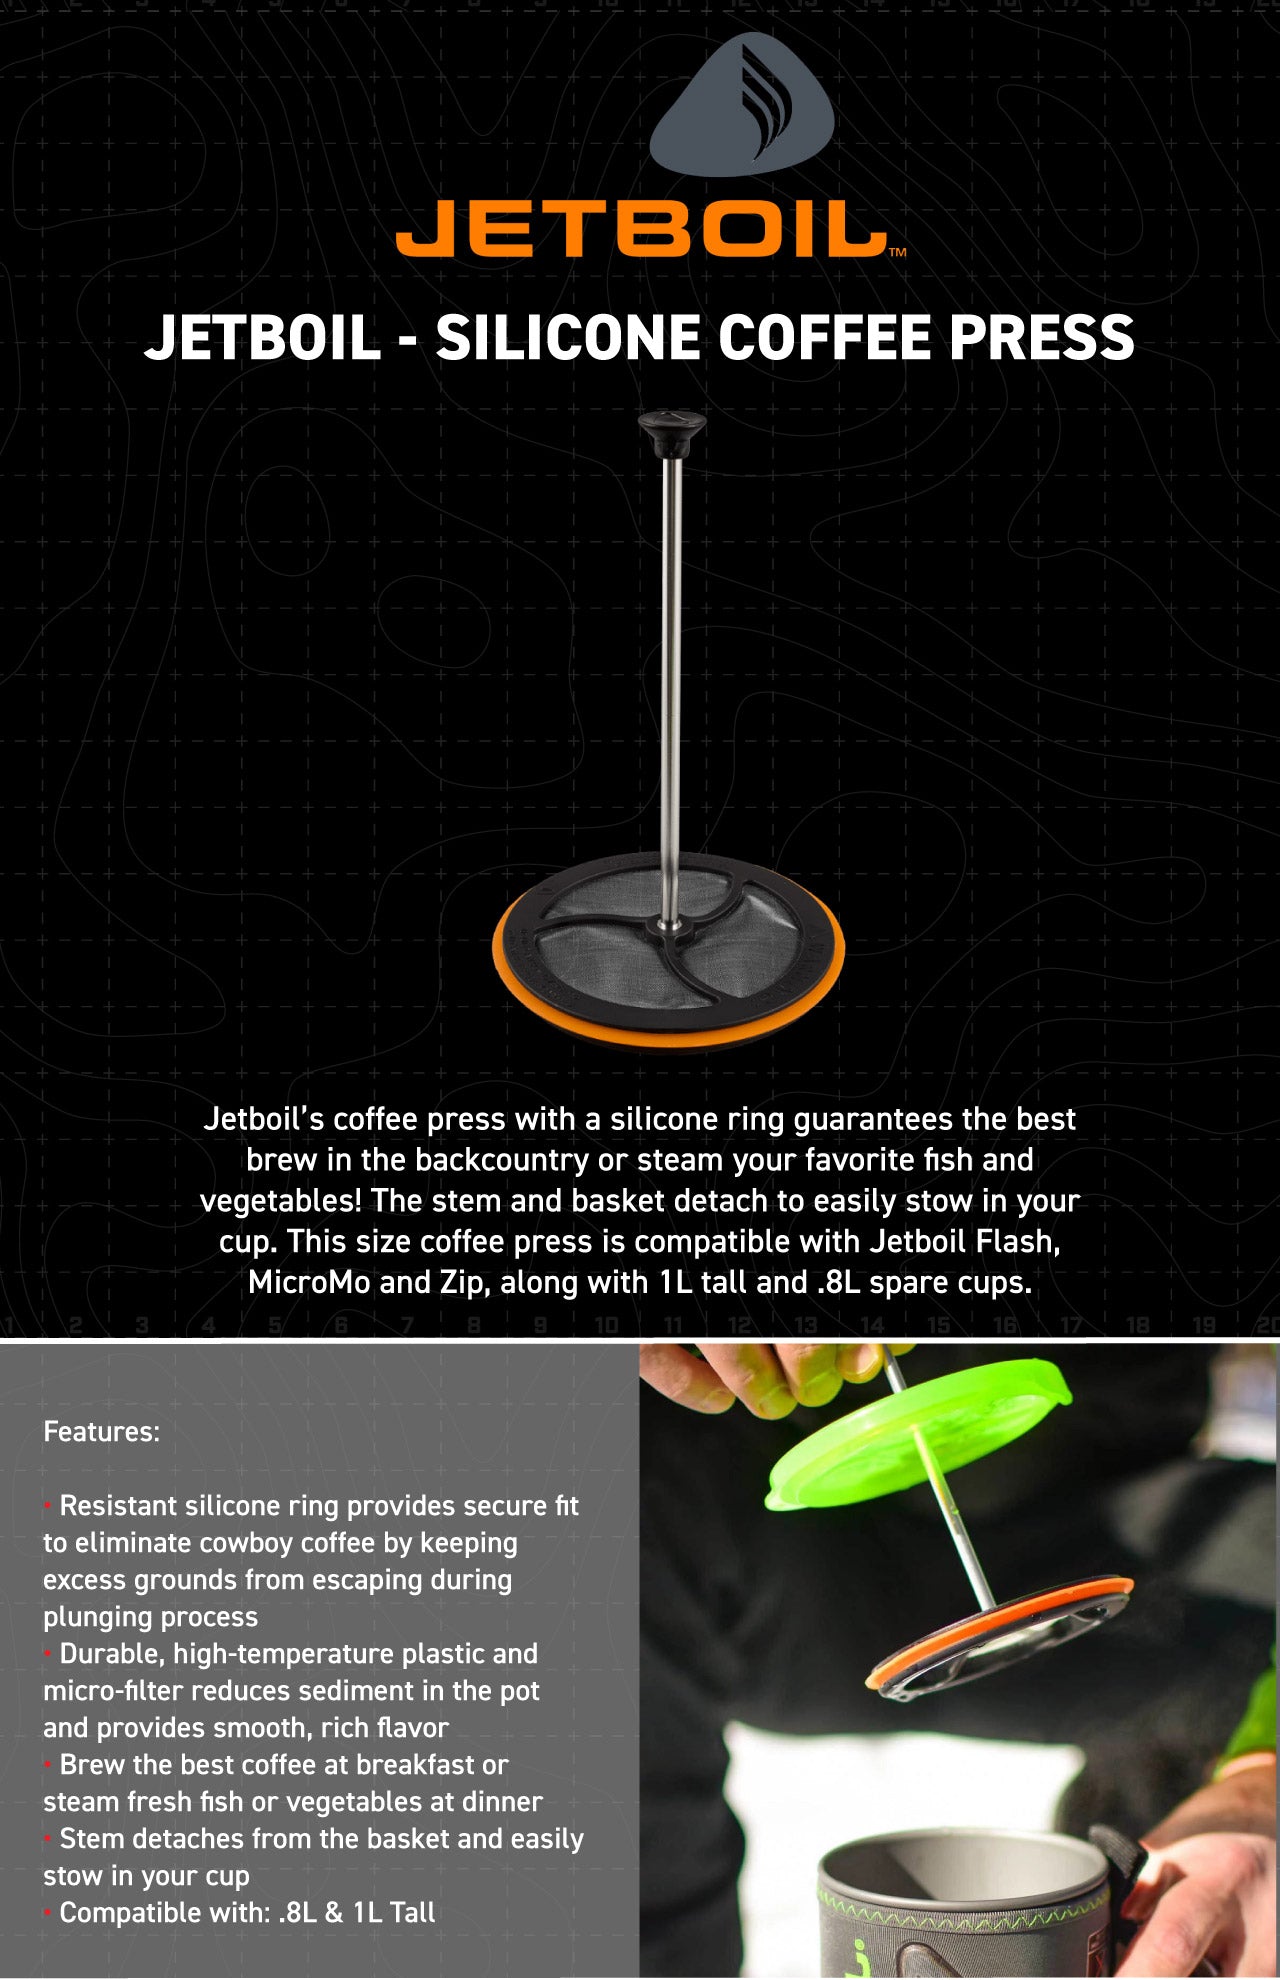 Jetboil’s coffee press with a silicone ring guarantees the best brew in the backcountry or steam your favorite fish and vegetables! The stem and basket detach to easily stow in your cup. This size coffee press is compatible with Jetboil Flash, MicroMo and Zip, along with 1L tall and .8L spare cups.